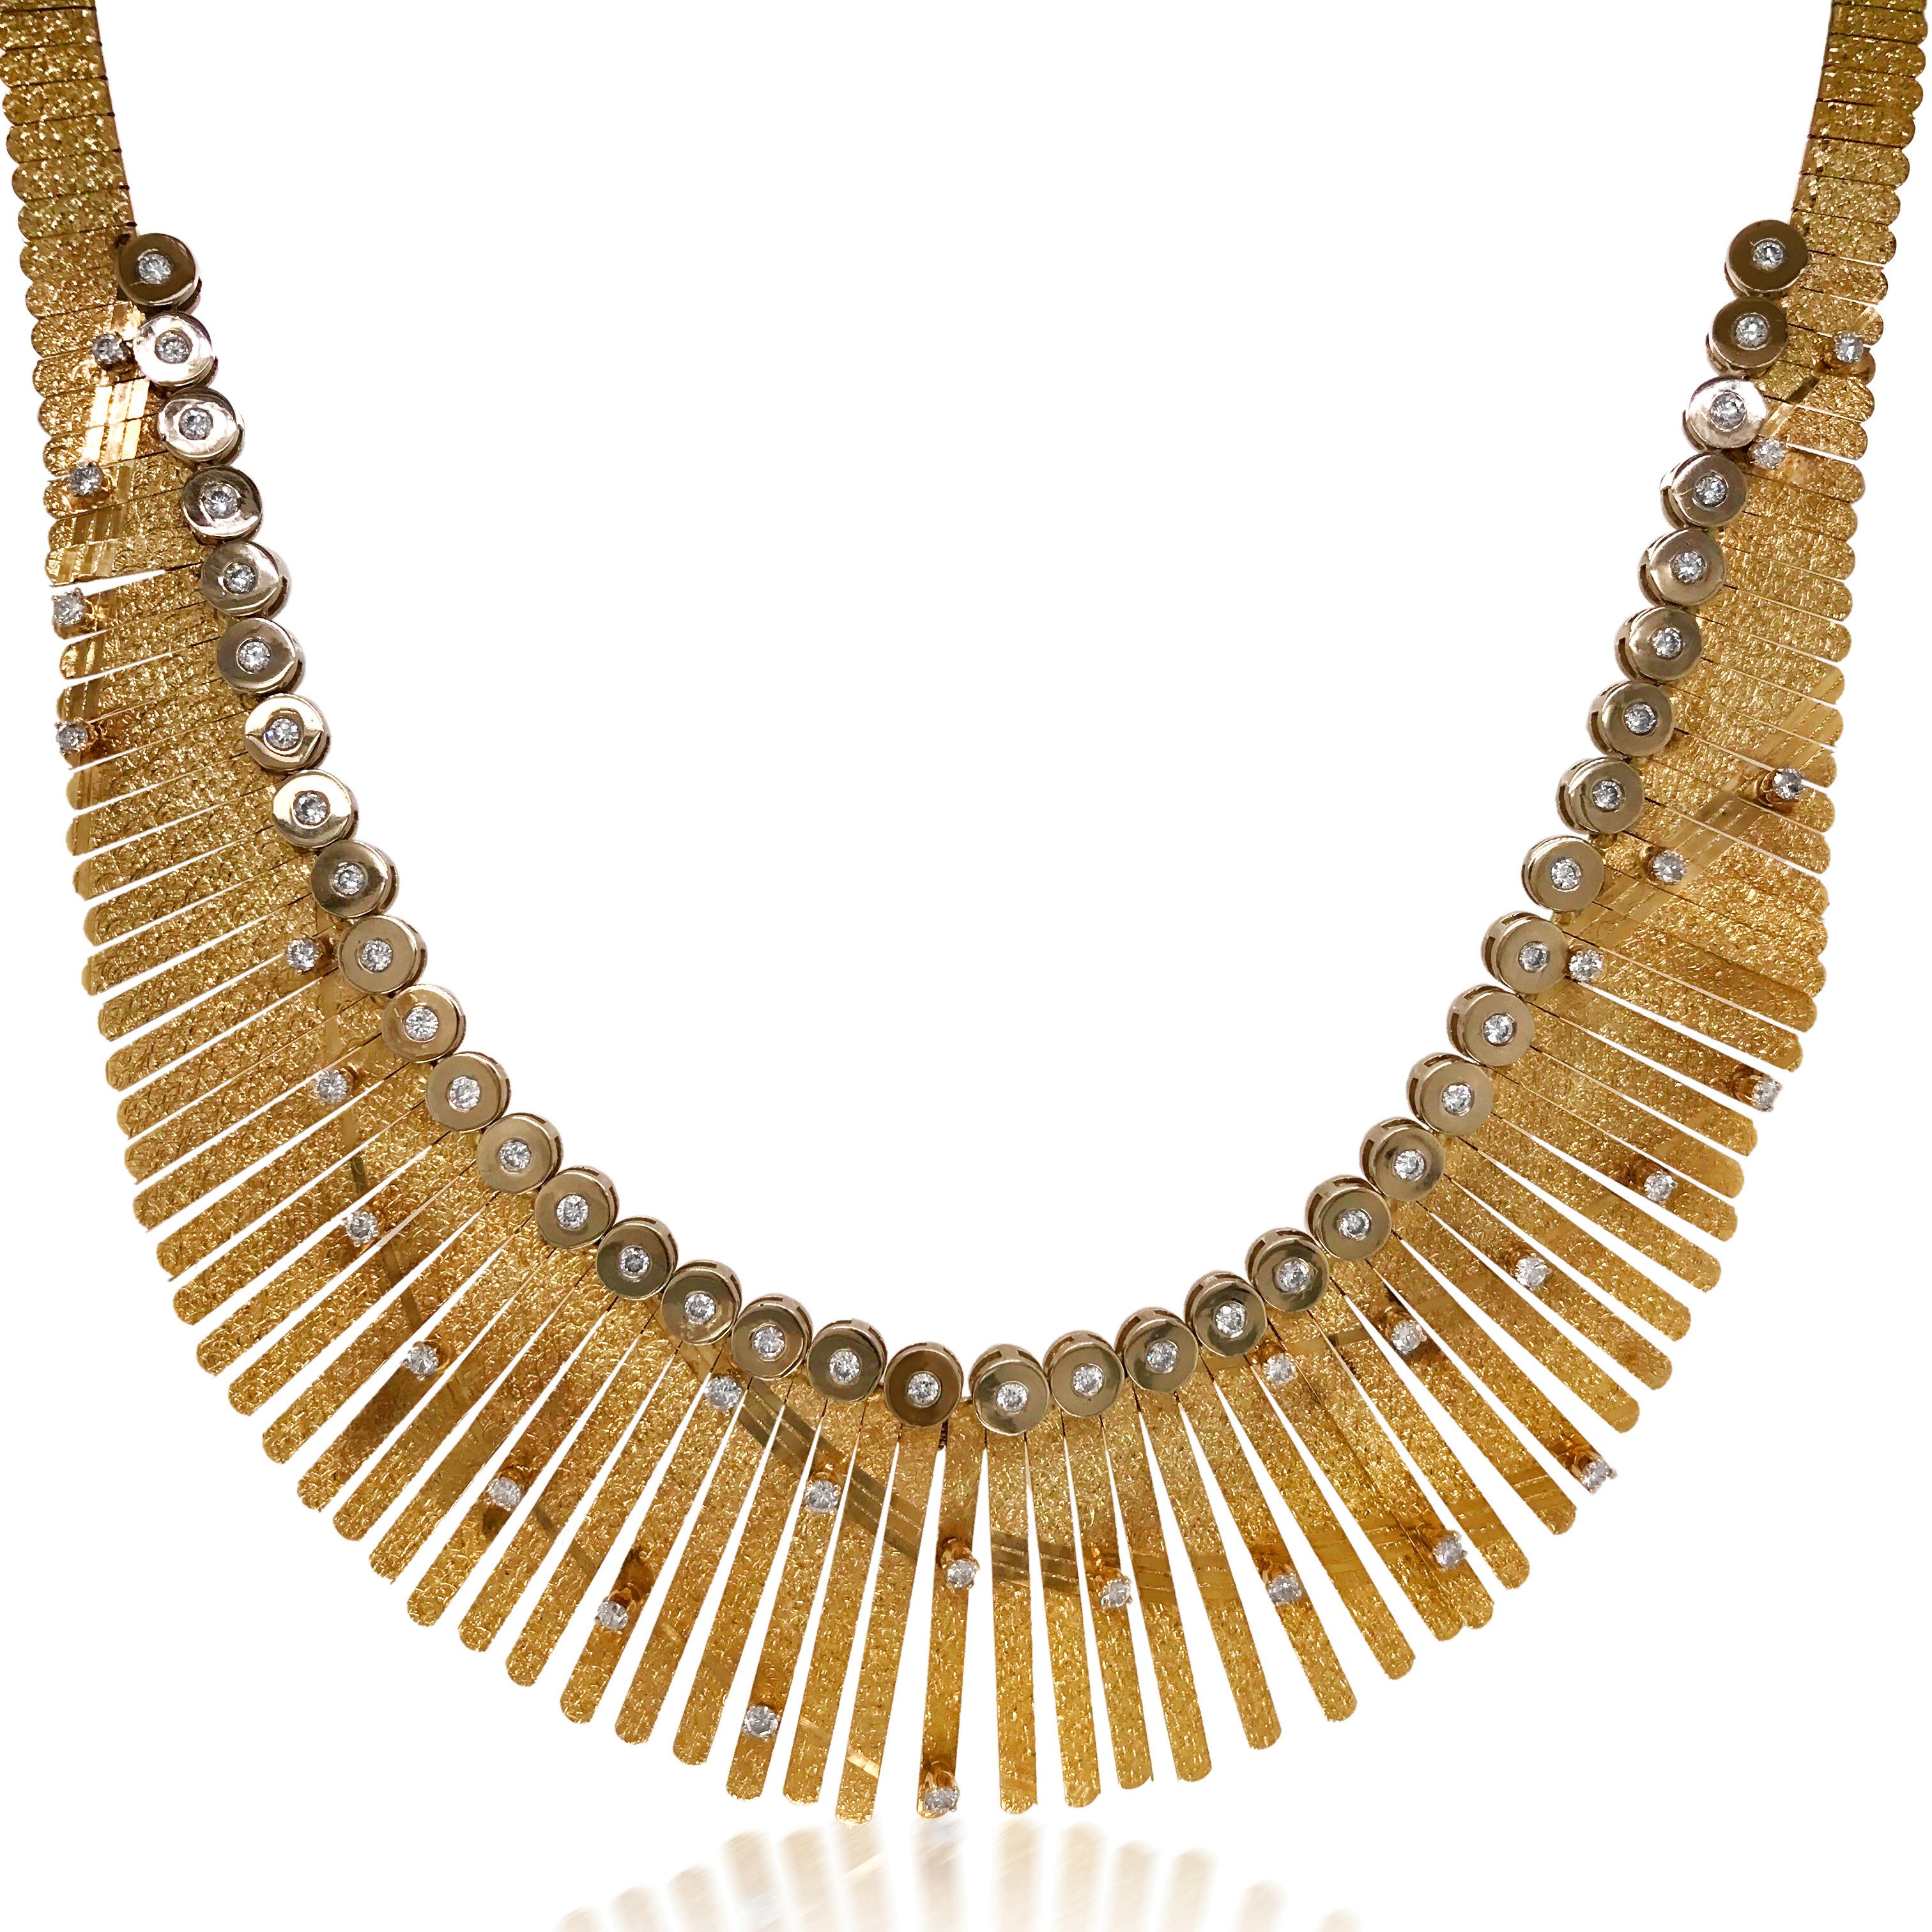 Round diamonds approx. 2.68 ct splattered on 14k gold necklace.

Measurements: 46 cm in length.
Weight: 62.8 grams.
Stamps: 